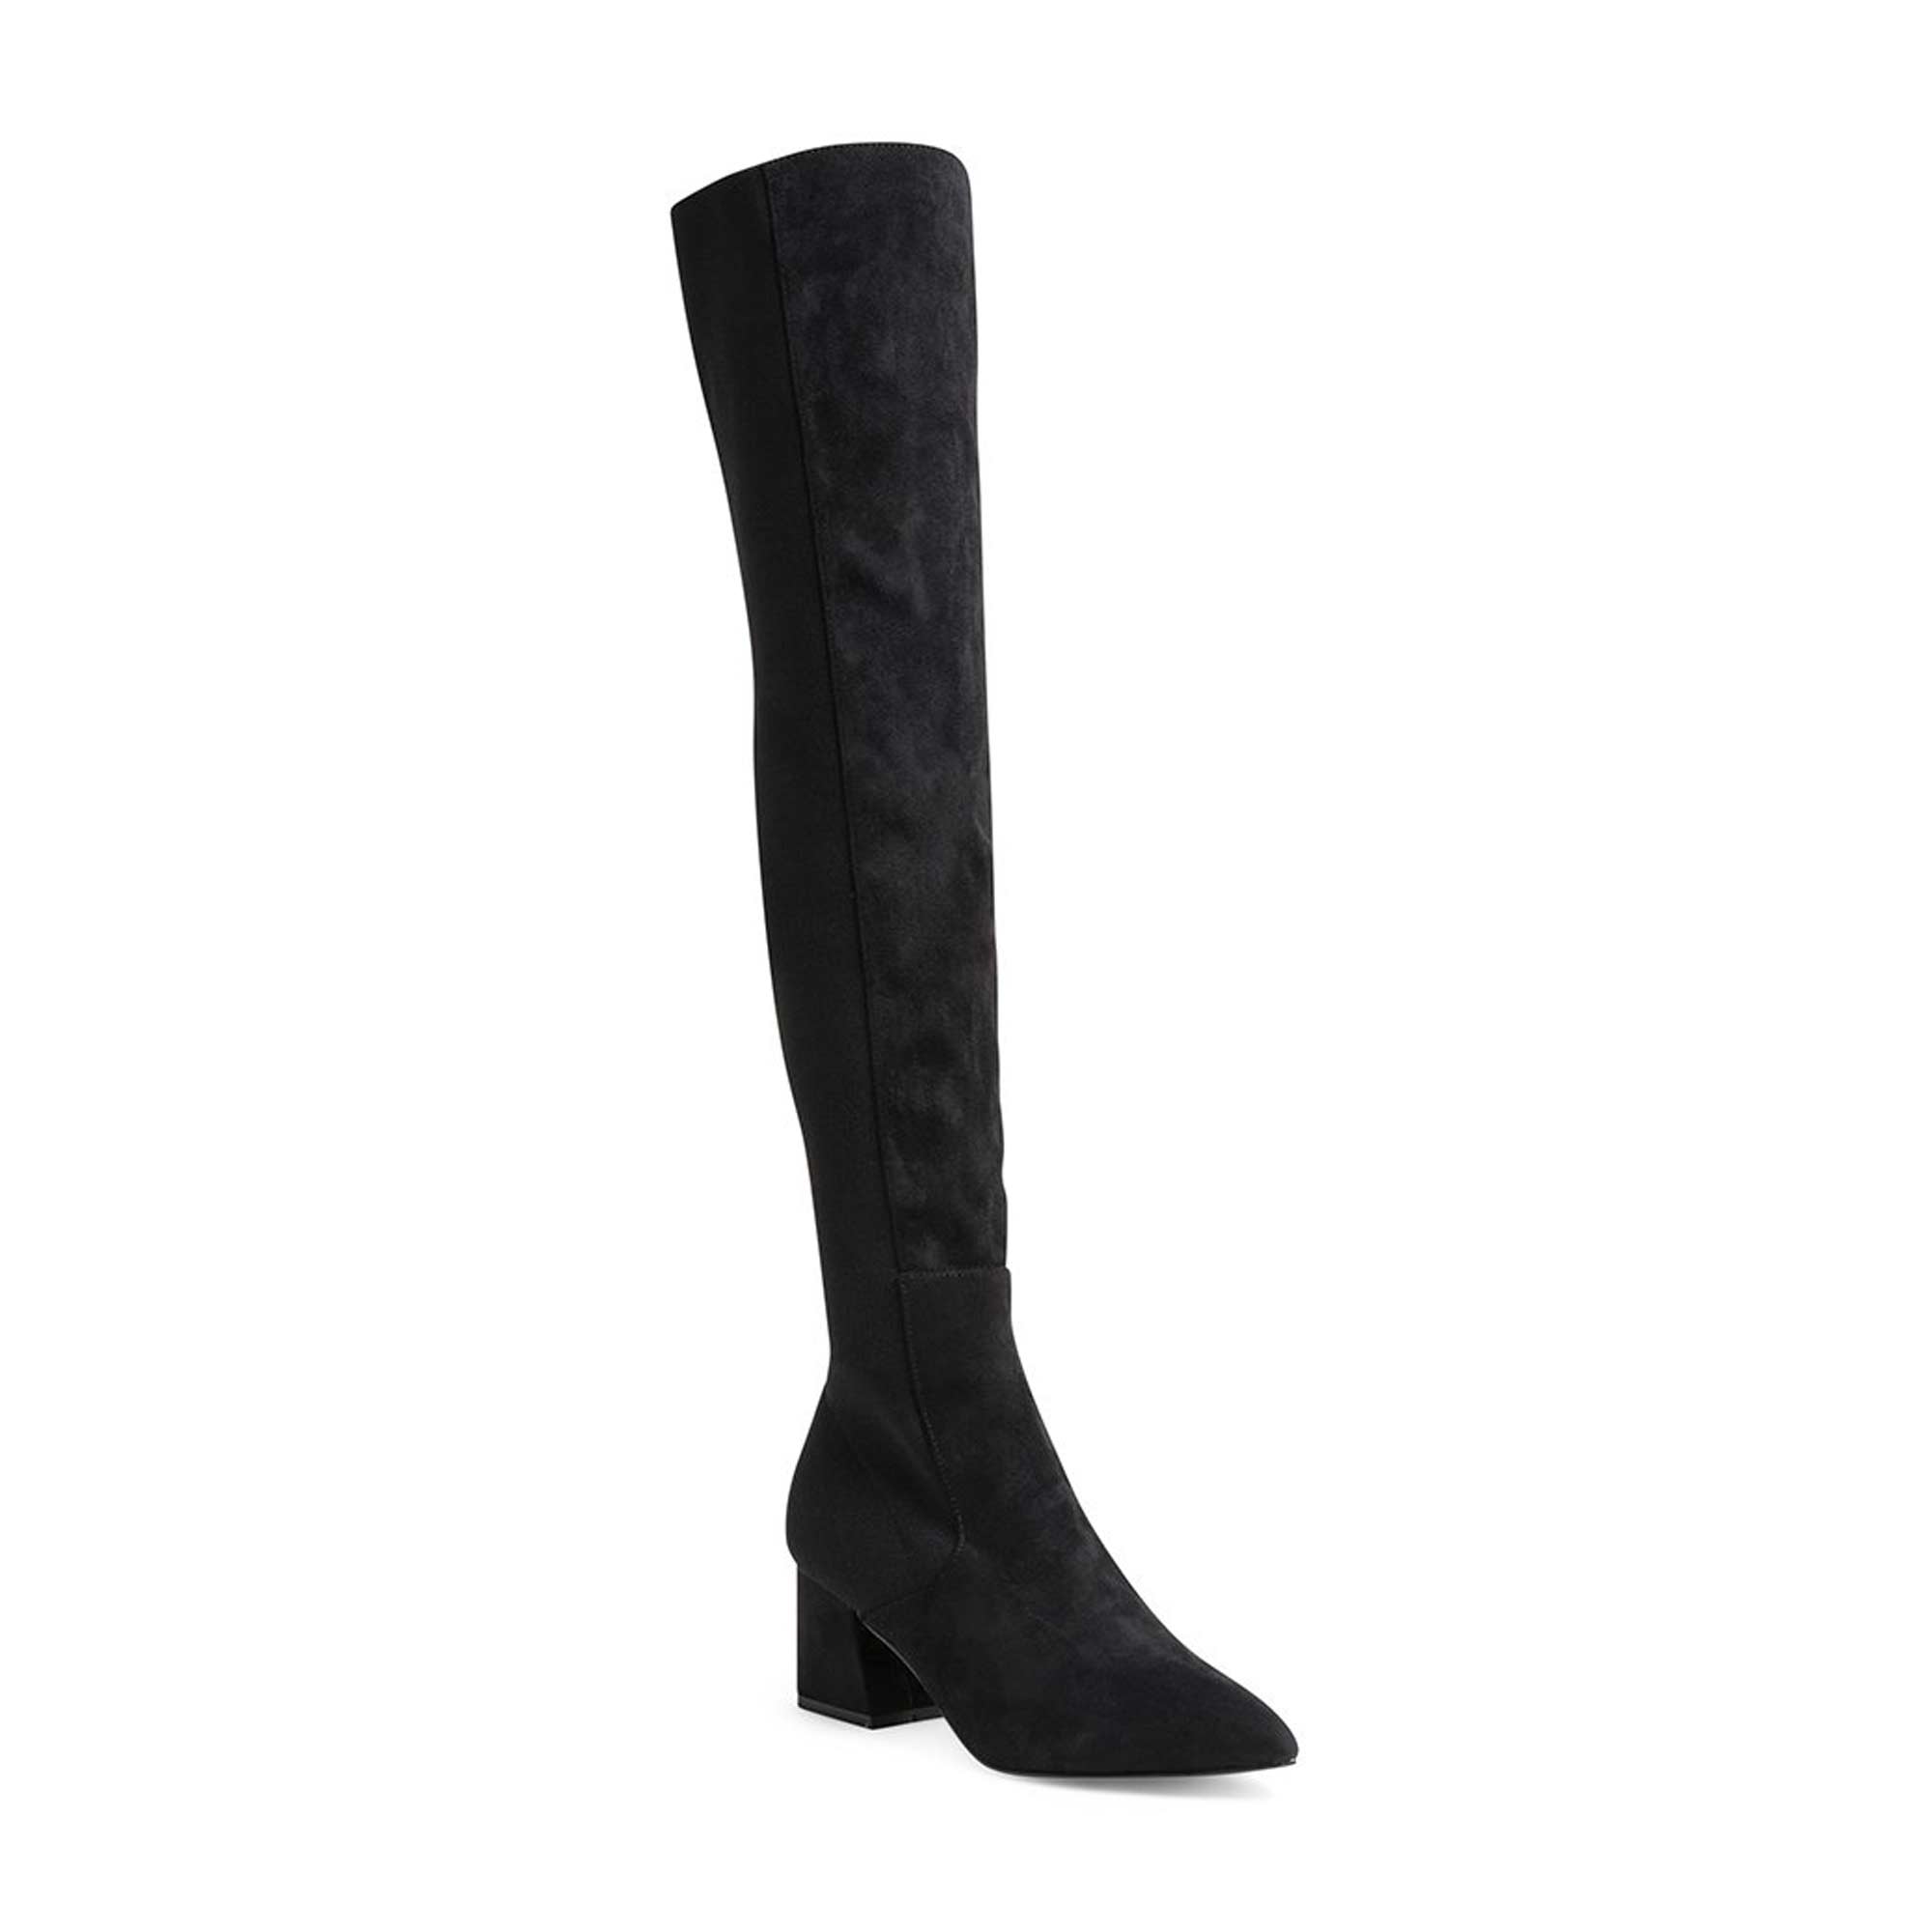 AGGIE Black Over The Knee Boots  Women's Designer Boots – Steve Madden  Canada